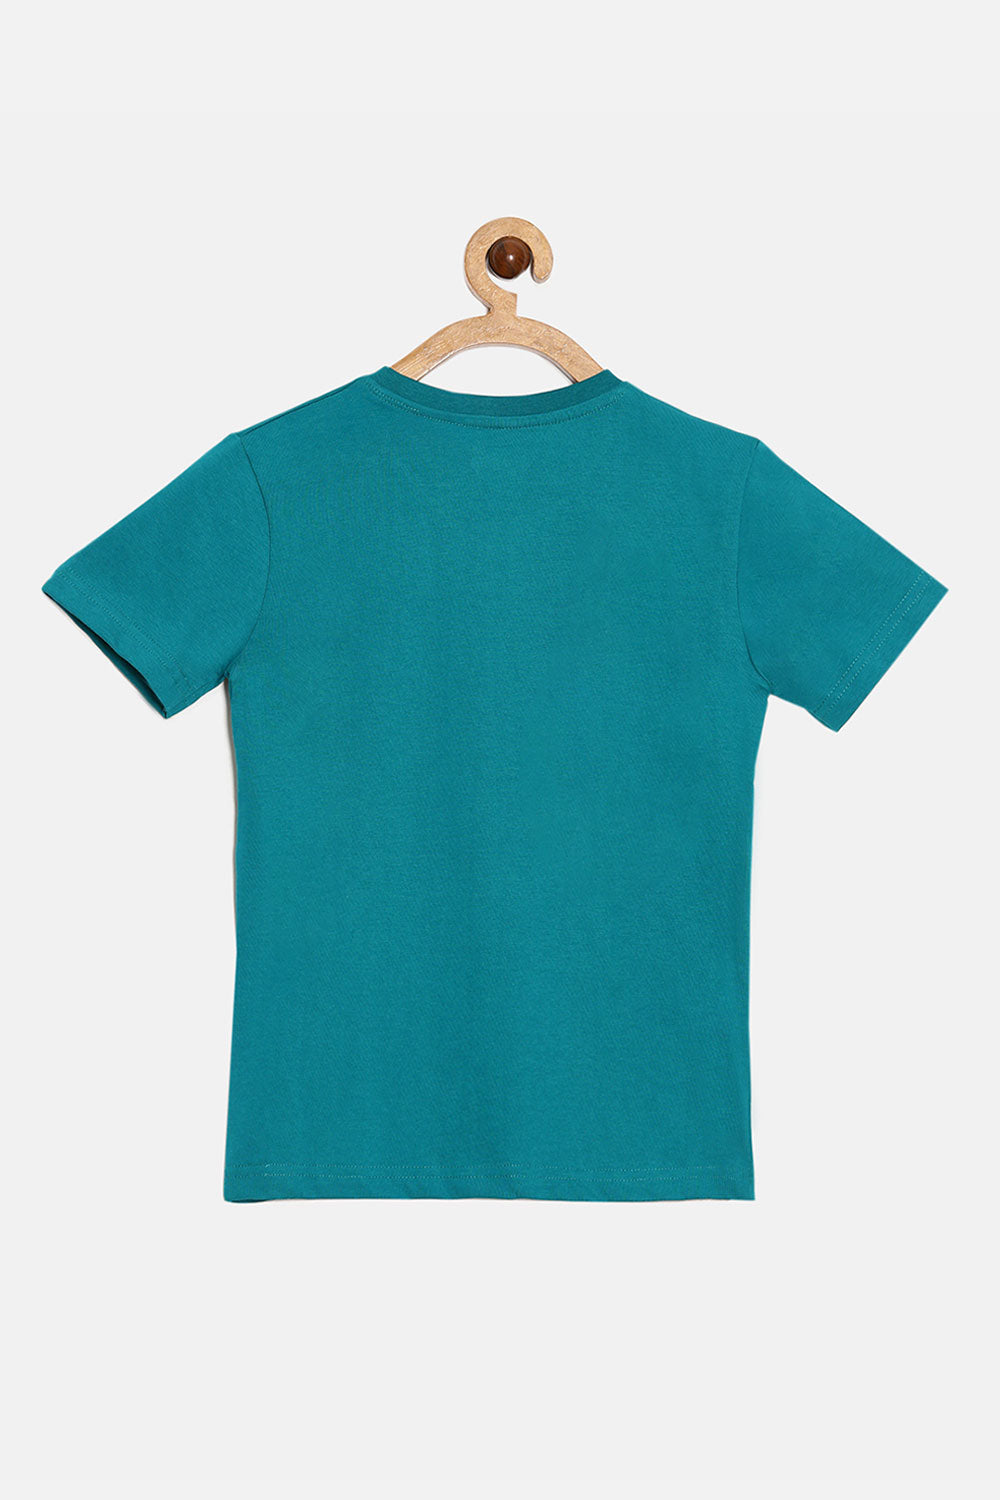 The Young Future - Boys T-shirt - Peacock Green - BC12